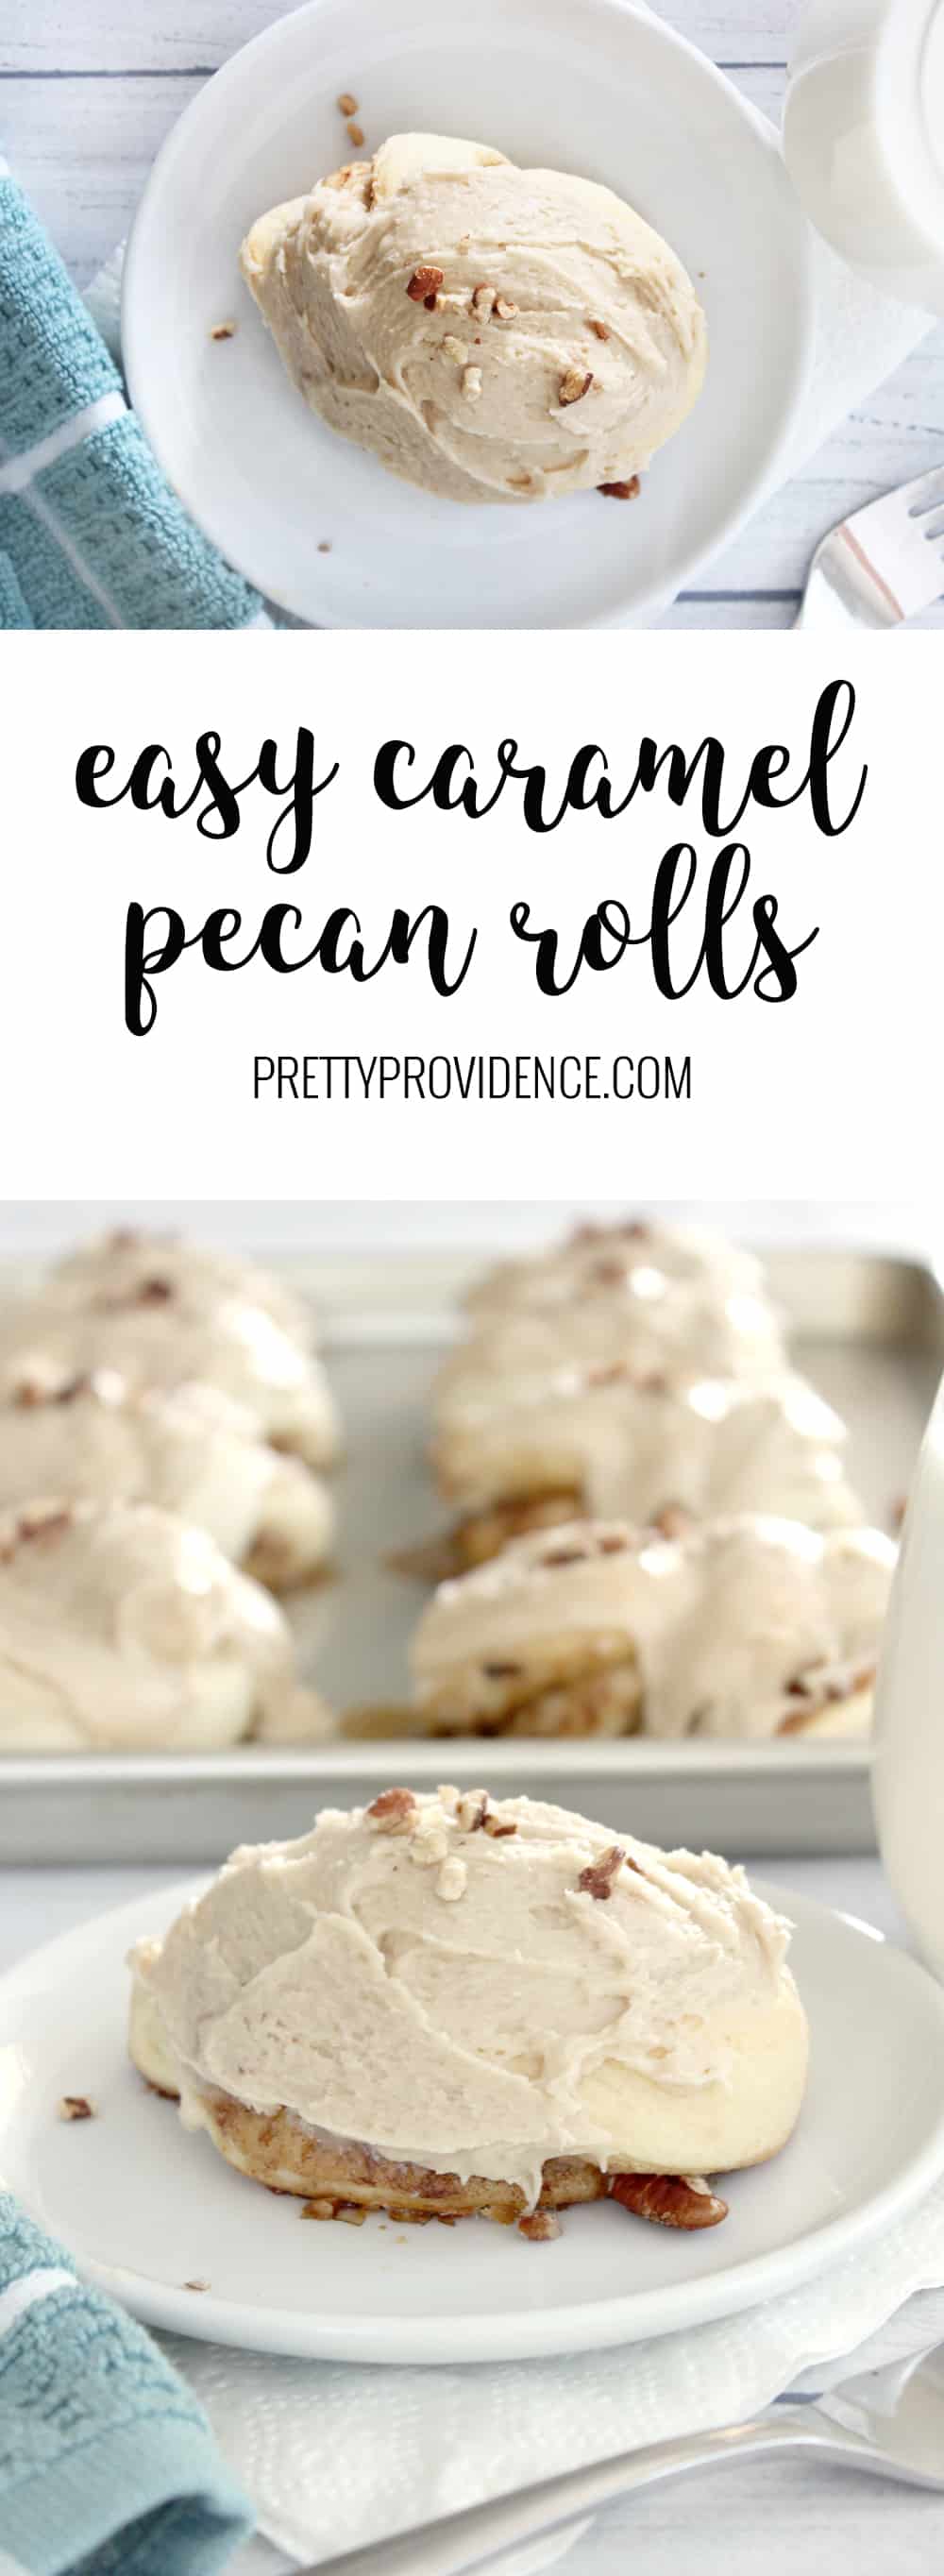 These caramel pecan rolls are unreal good! Super easy too! 